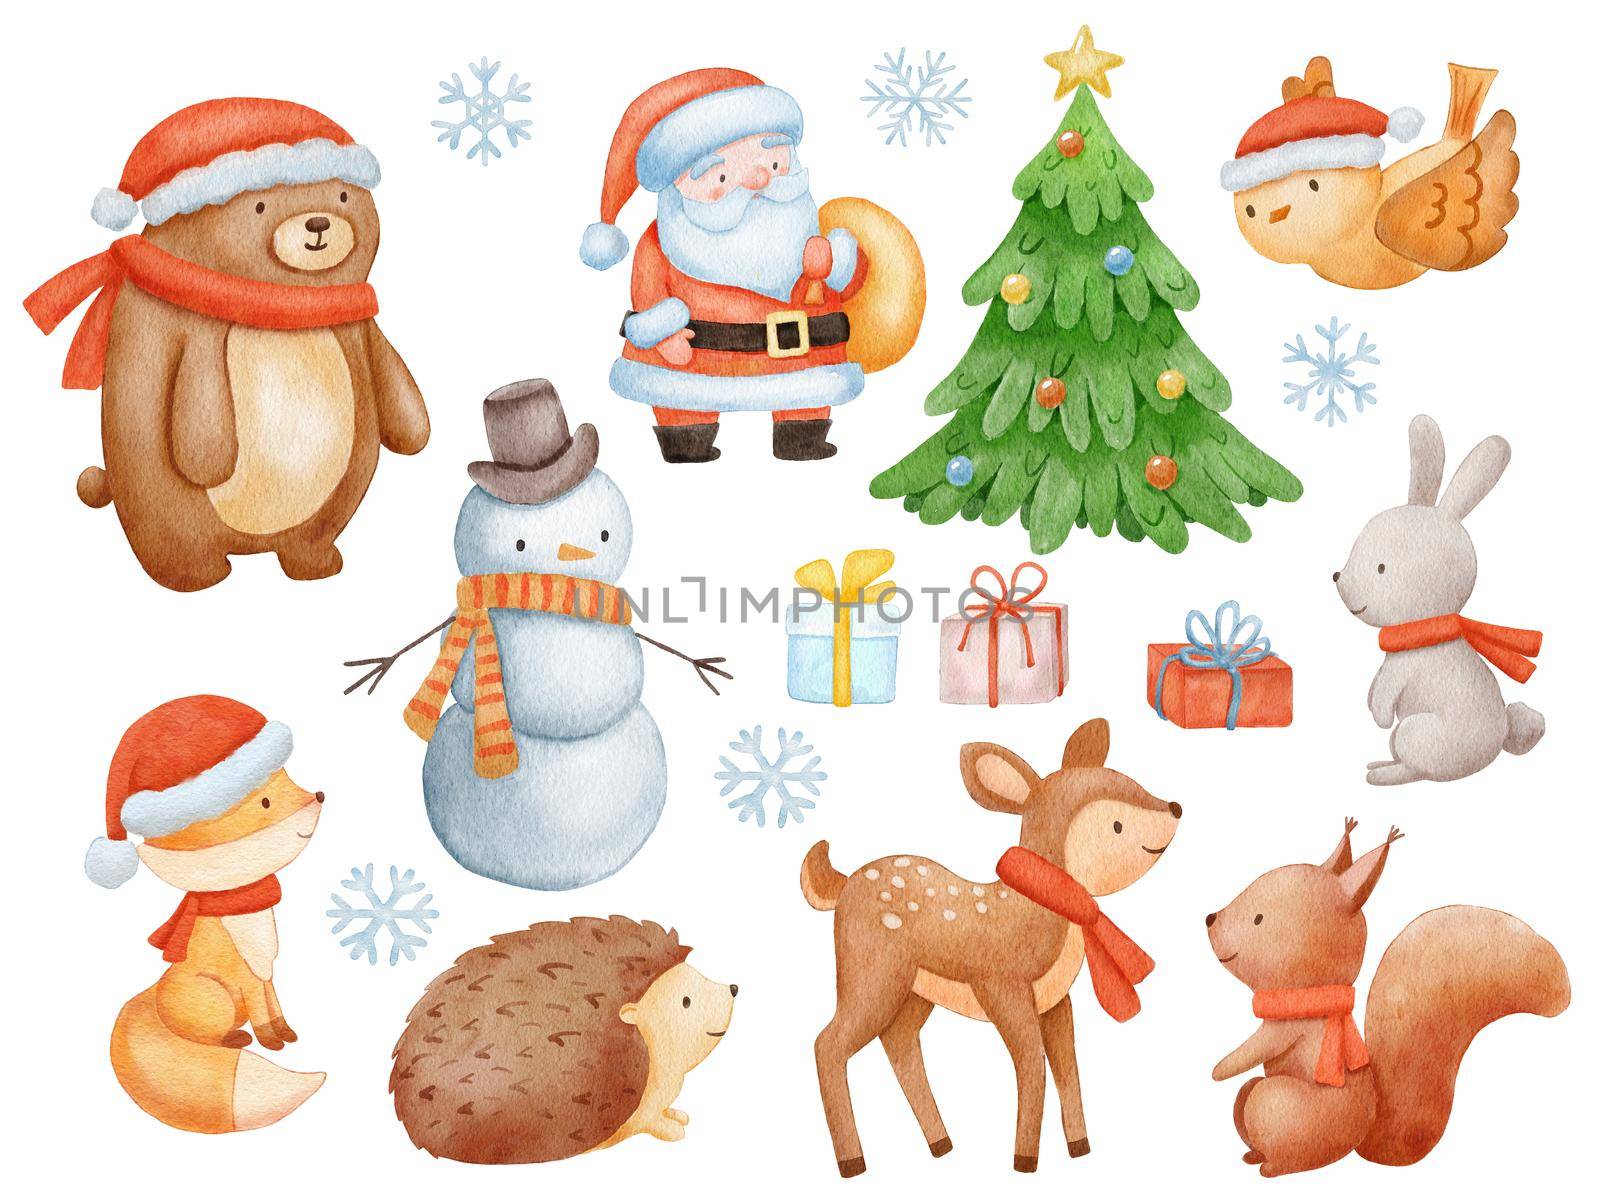 Cute Santa Claus, deer, bear and snowman. Set of Watercolor Christmas illustrations isolated on white. by ElenaPlatova